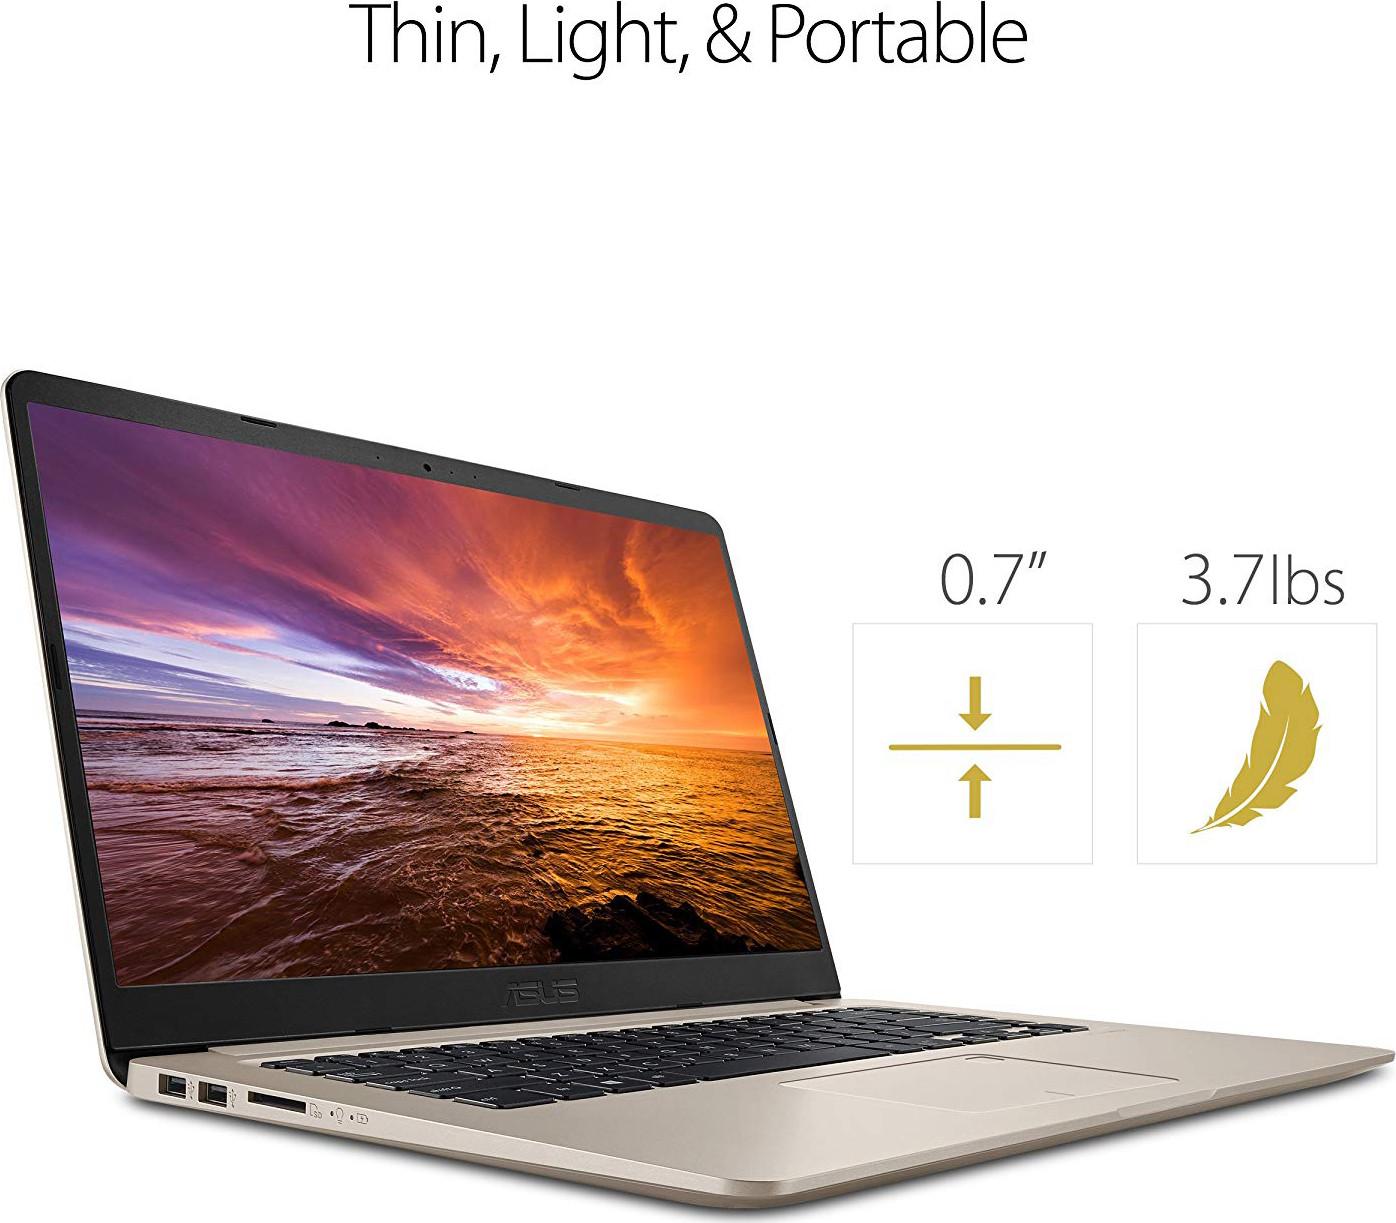 ASUS VivoBook S Ultra Thin and Portable Laptop, Intel Core i7-8550U Processor, 8GB DDR4 RAM, 128GB SSD+1TB HDD, 15.6” FHD WideView Display, ASUS NanoEdge Bezel, S510UA-DS71